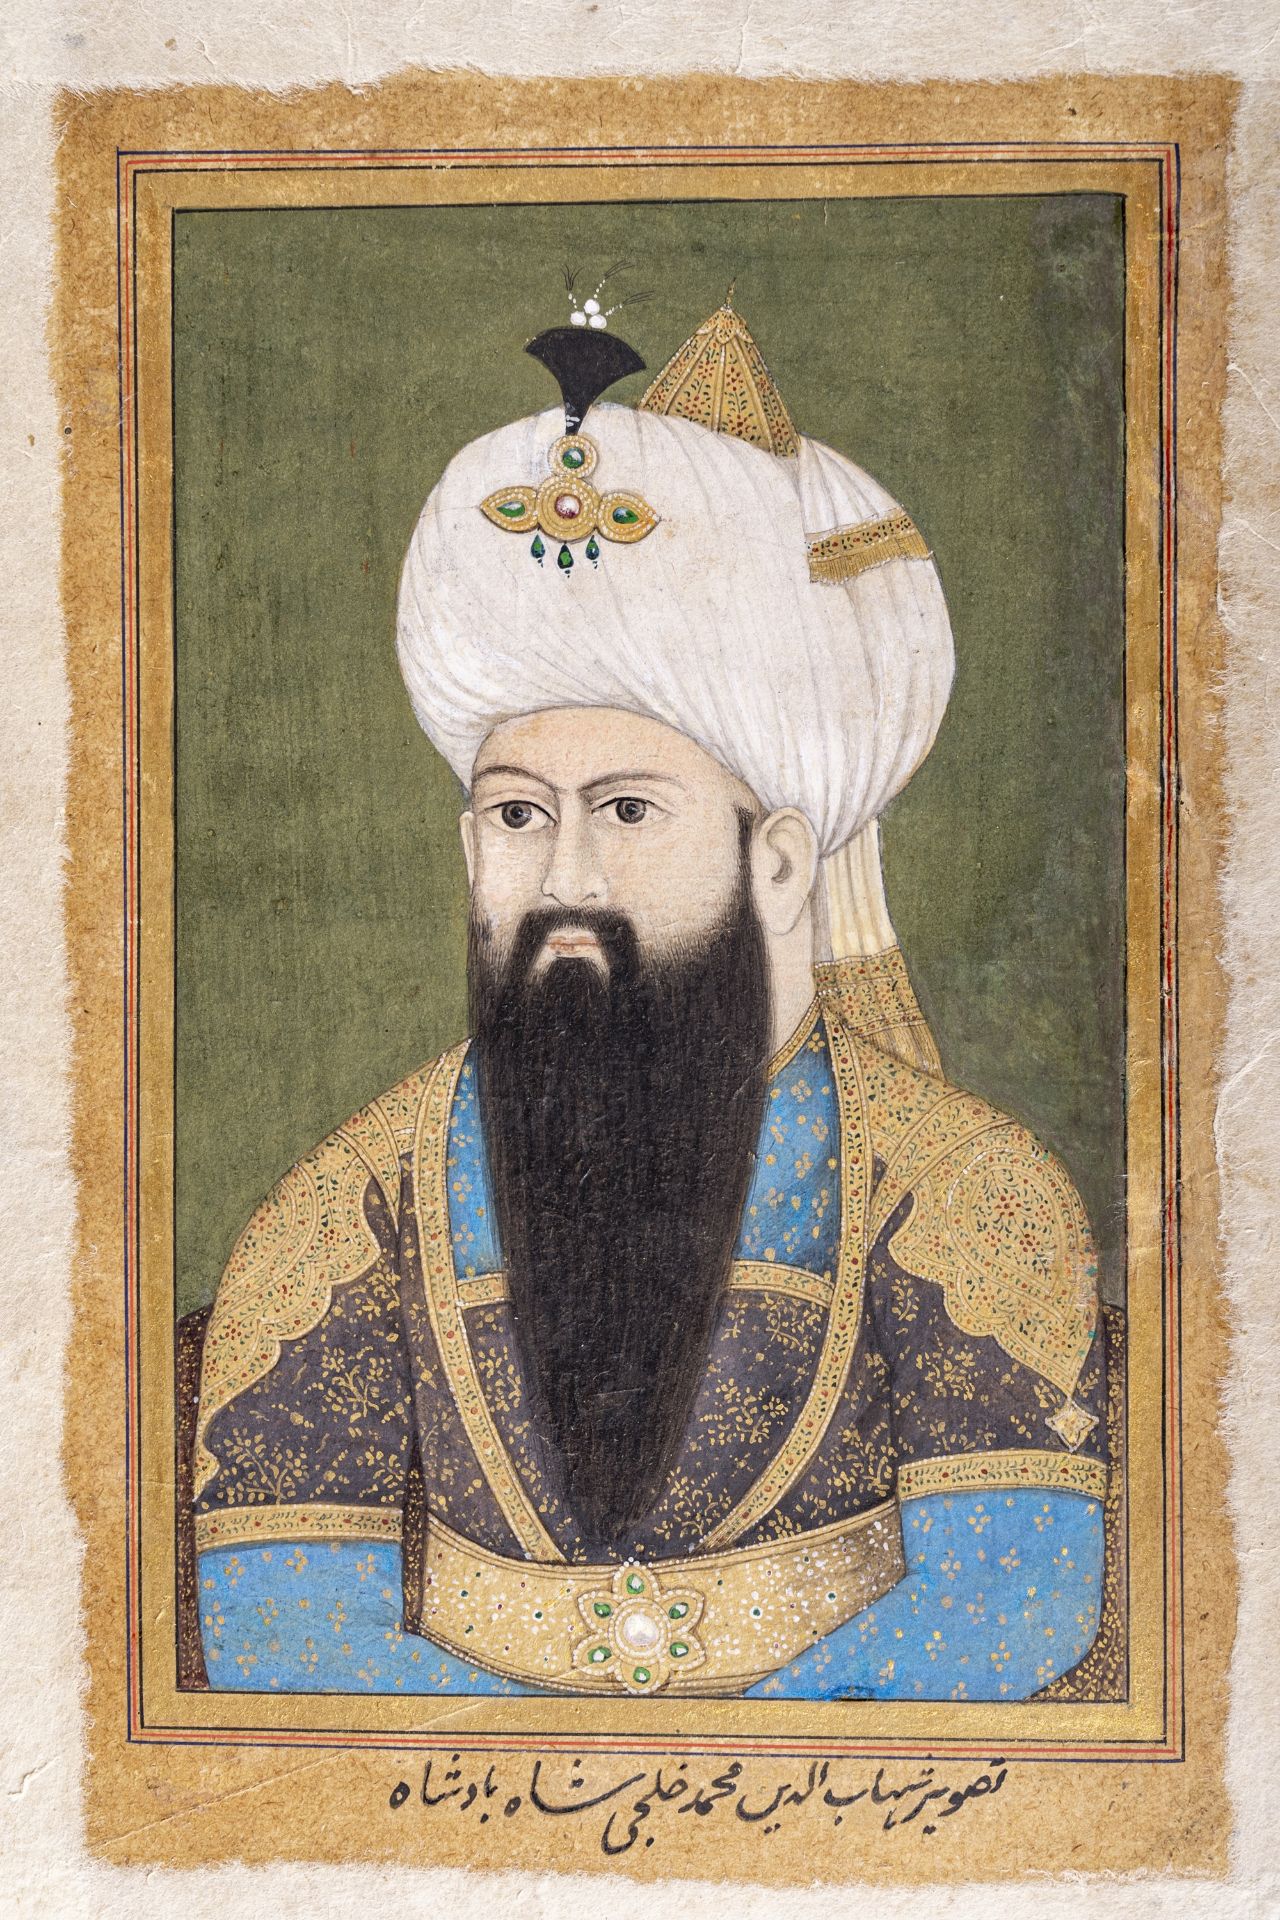 AN INDIAN MINIATURE PAINTING WITH PORTRAIT OF A MUGHAL NOBLEMAN, LATE 19th CENTURY - Image 3 of 5